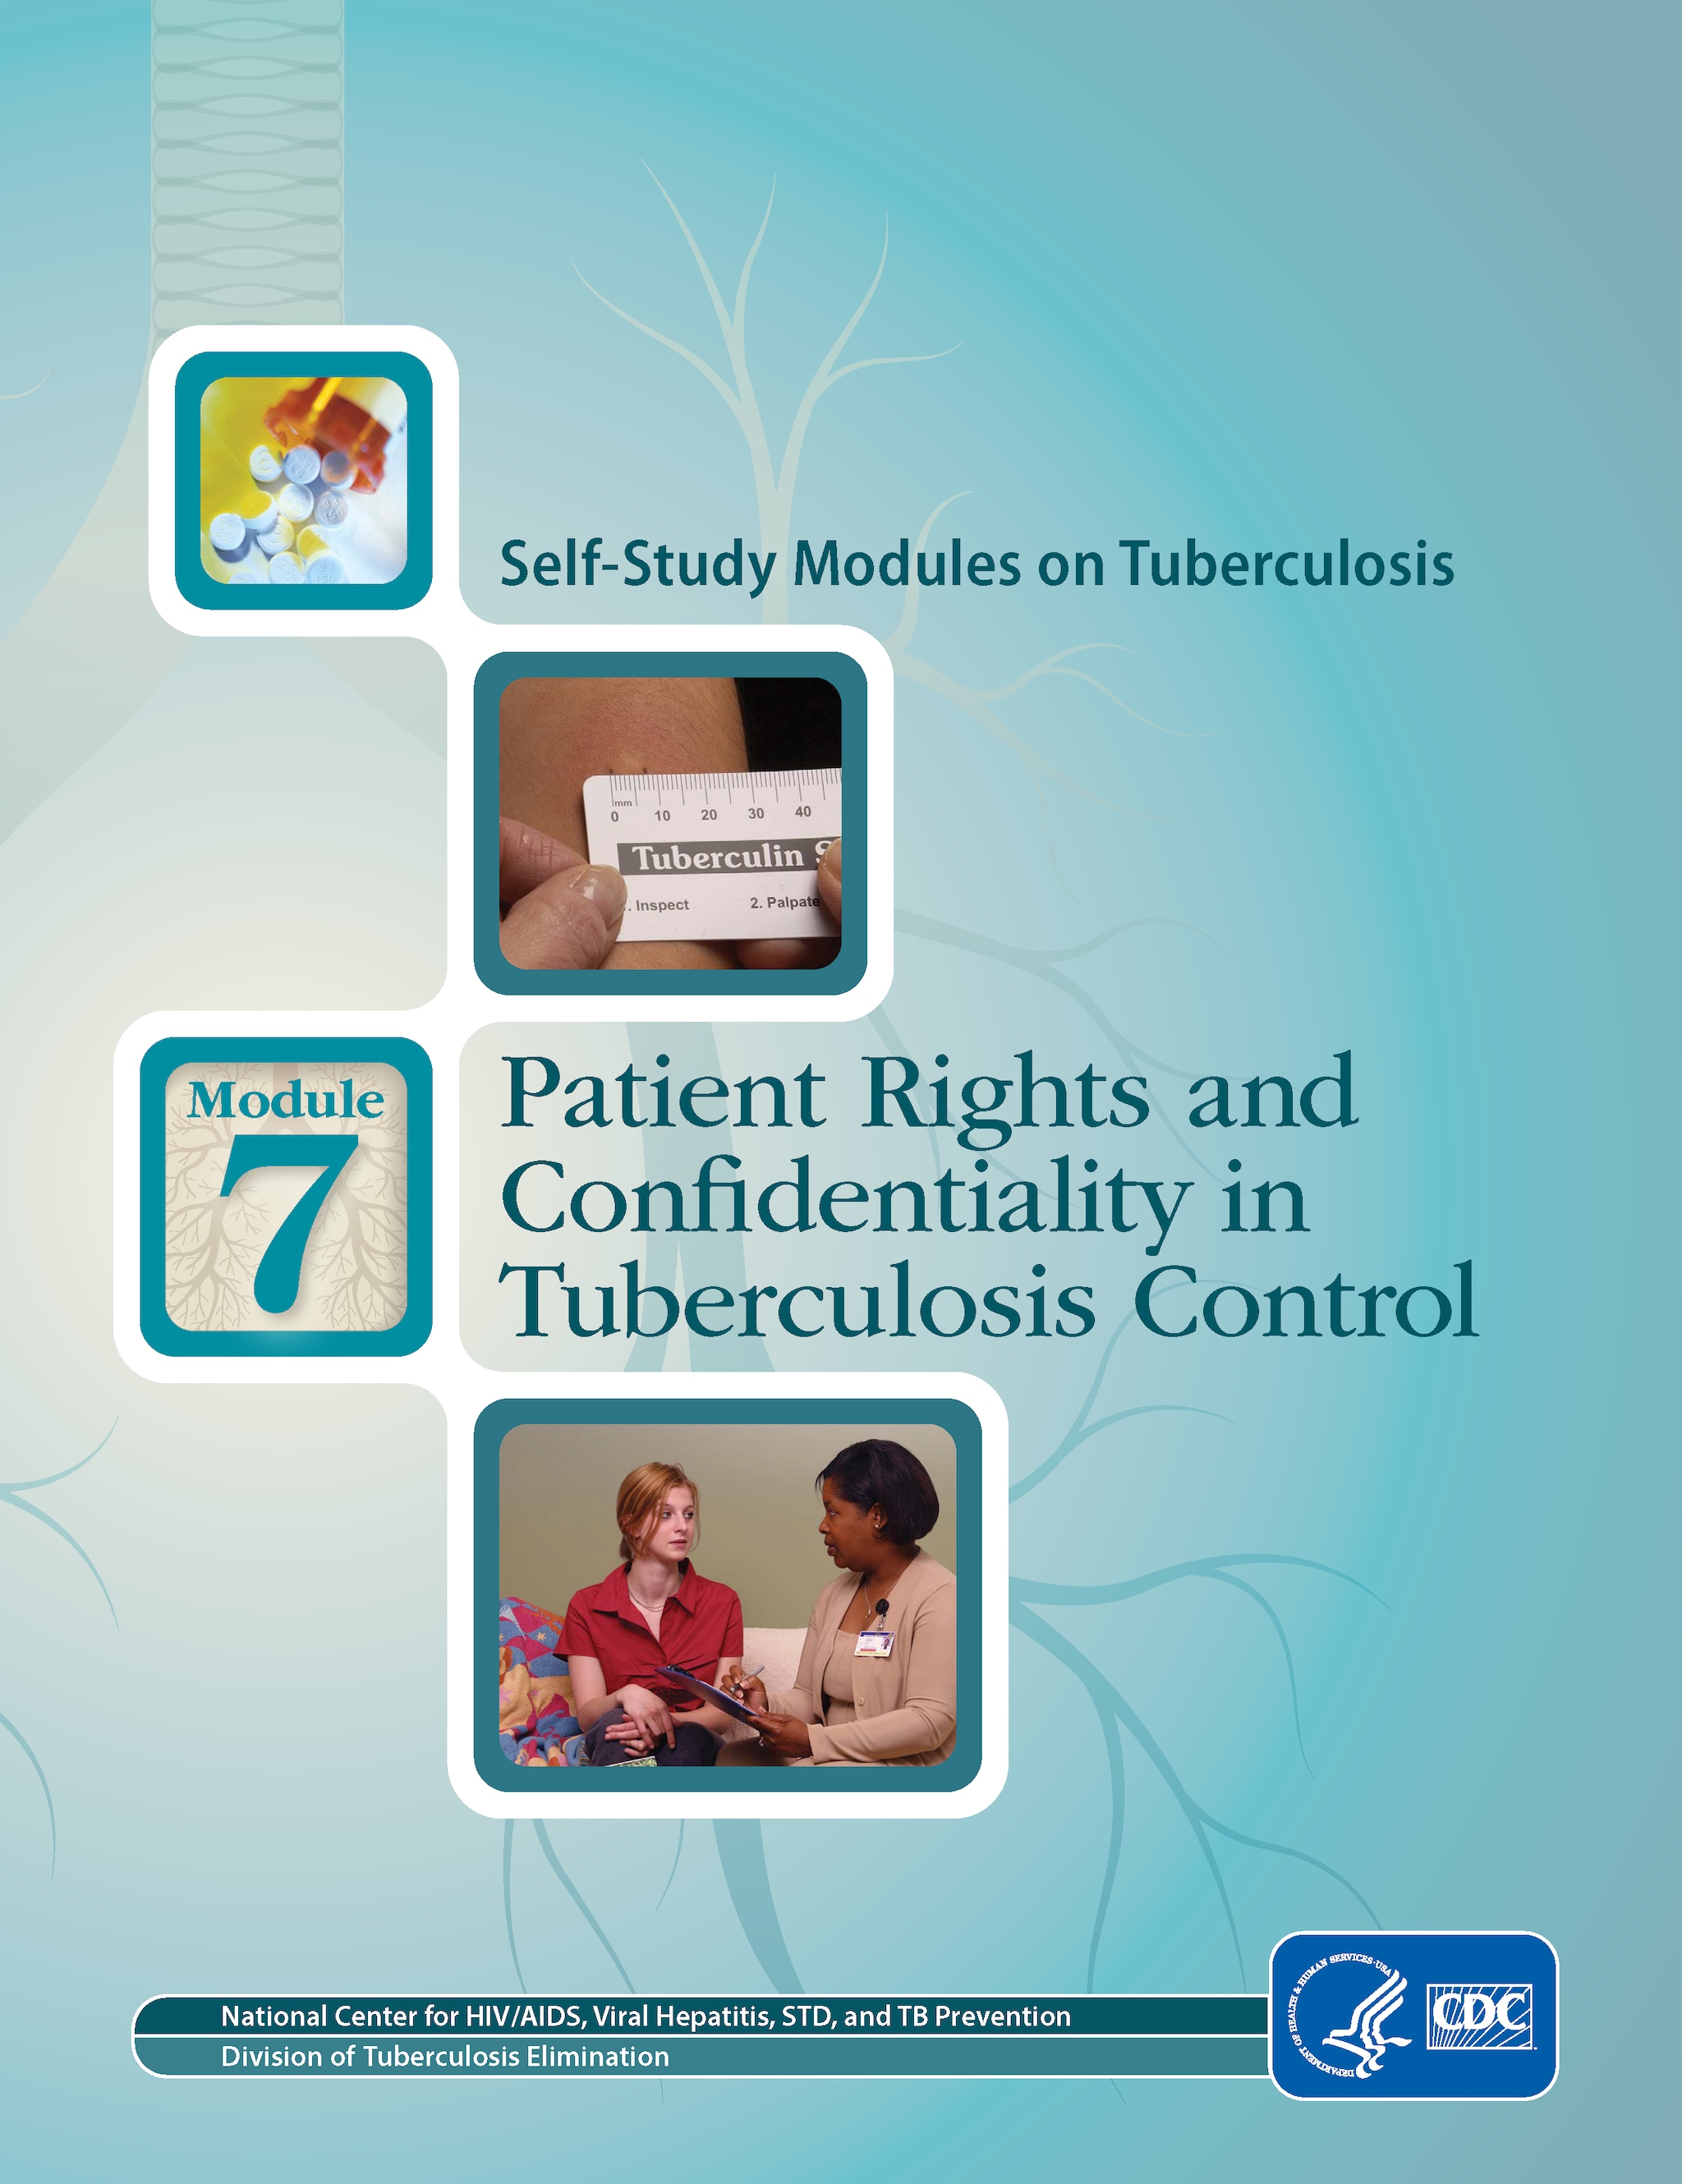 Self-Study Module 7: Patient Rights and Confidentiality in Tuberculosis Control